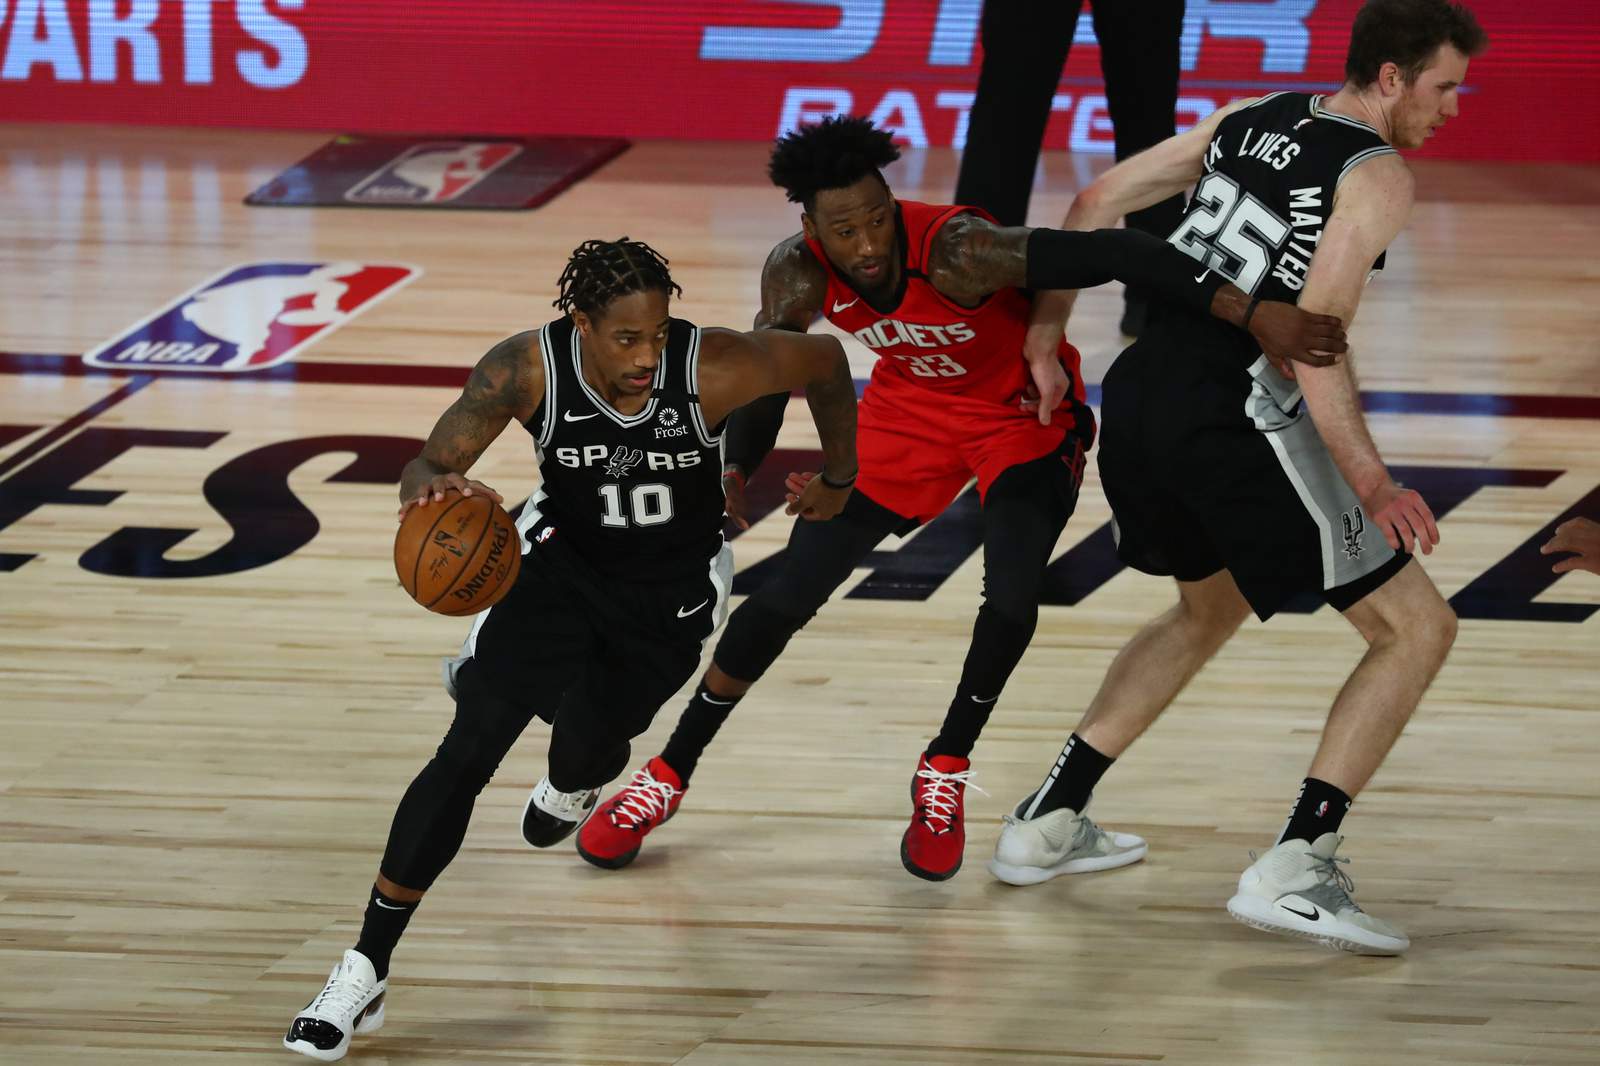 Sacramento Kings guard De'Aaron Fox (5) dribbles the ball during the second  half of an NBA basketball game against the Washington Wizards, Wednesday,  March 17, 2021, in Washington. The Kings won 121-119. (